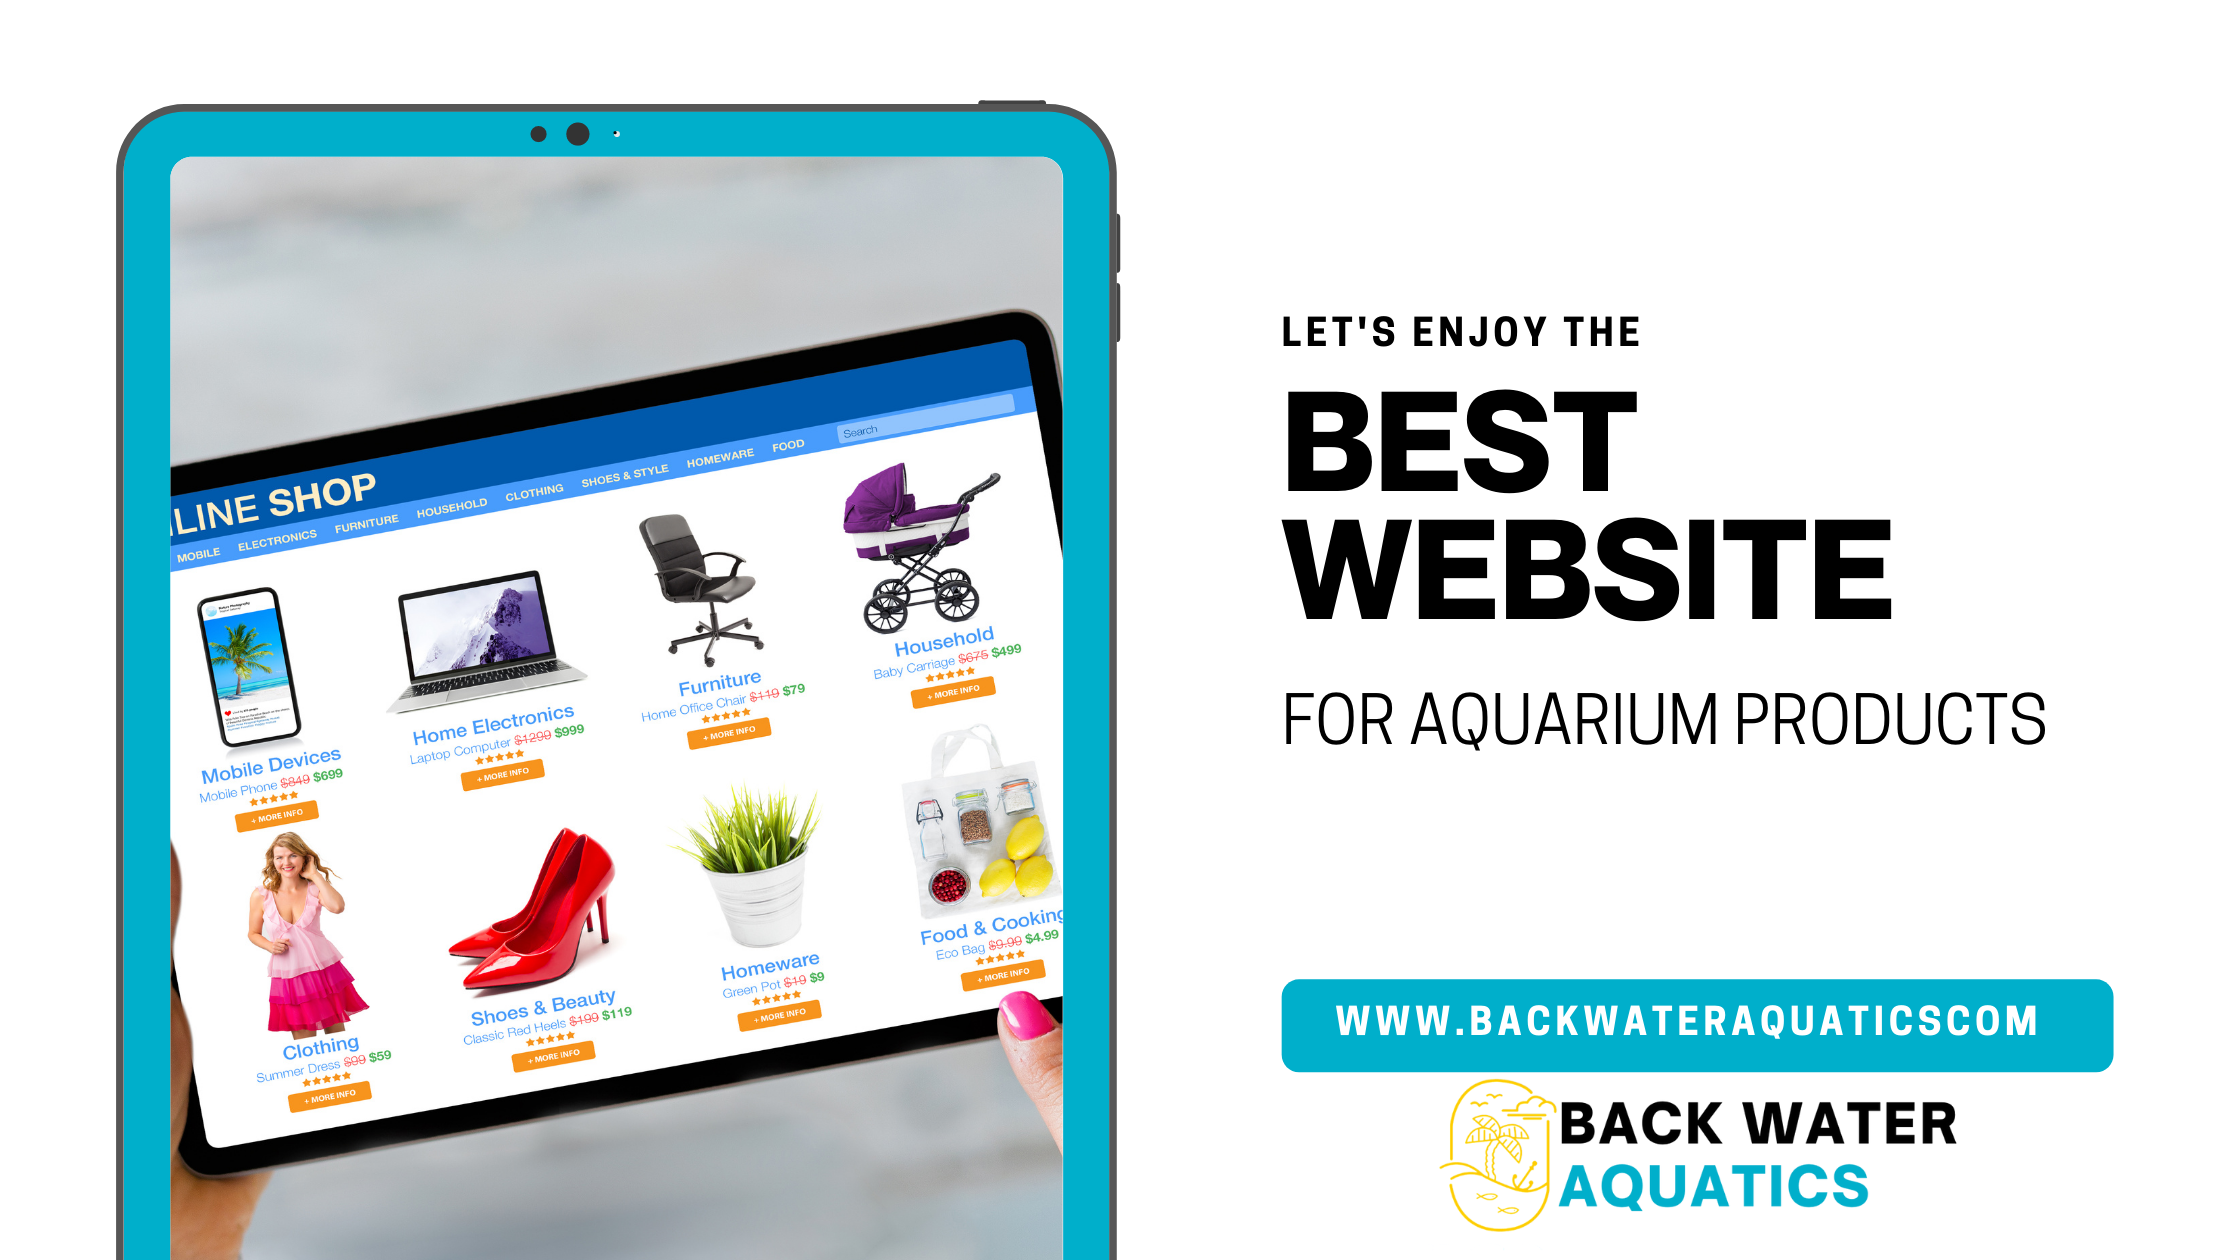 How to purchase aquarium products online in India